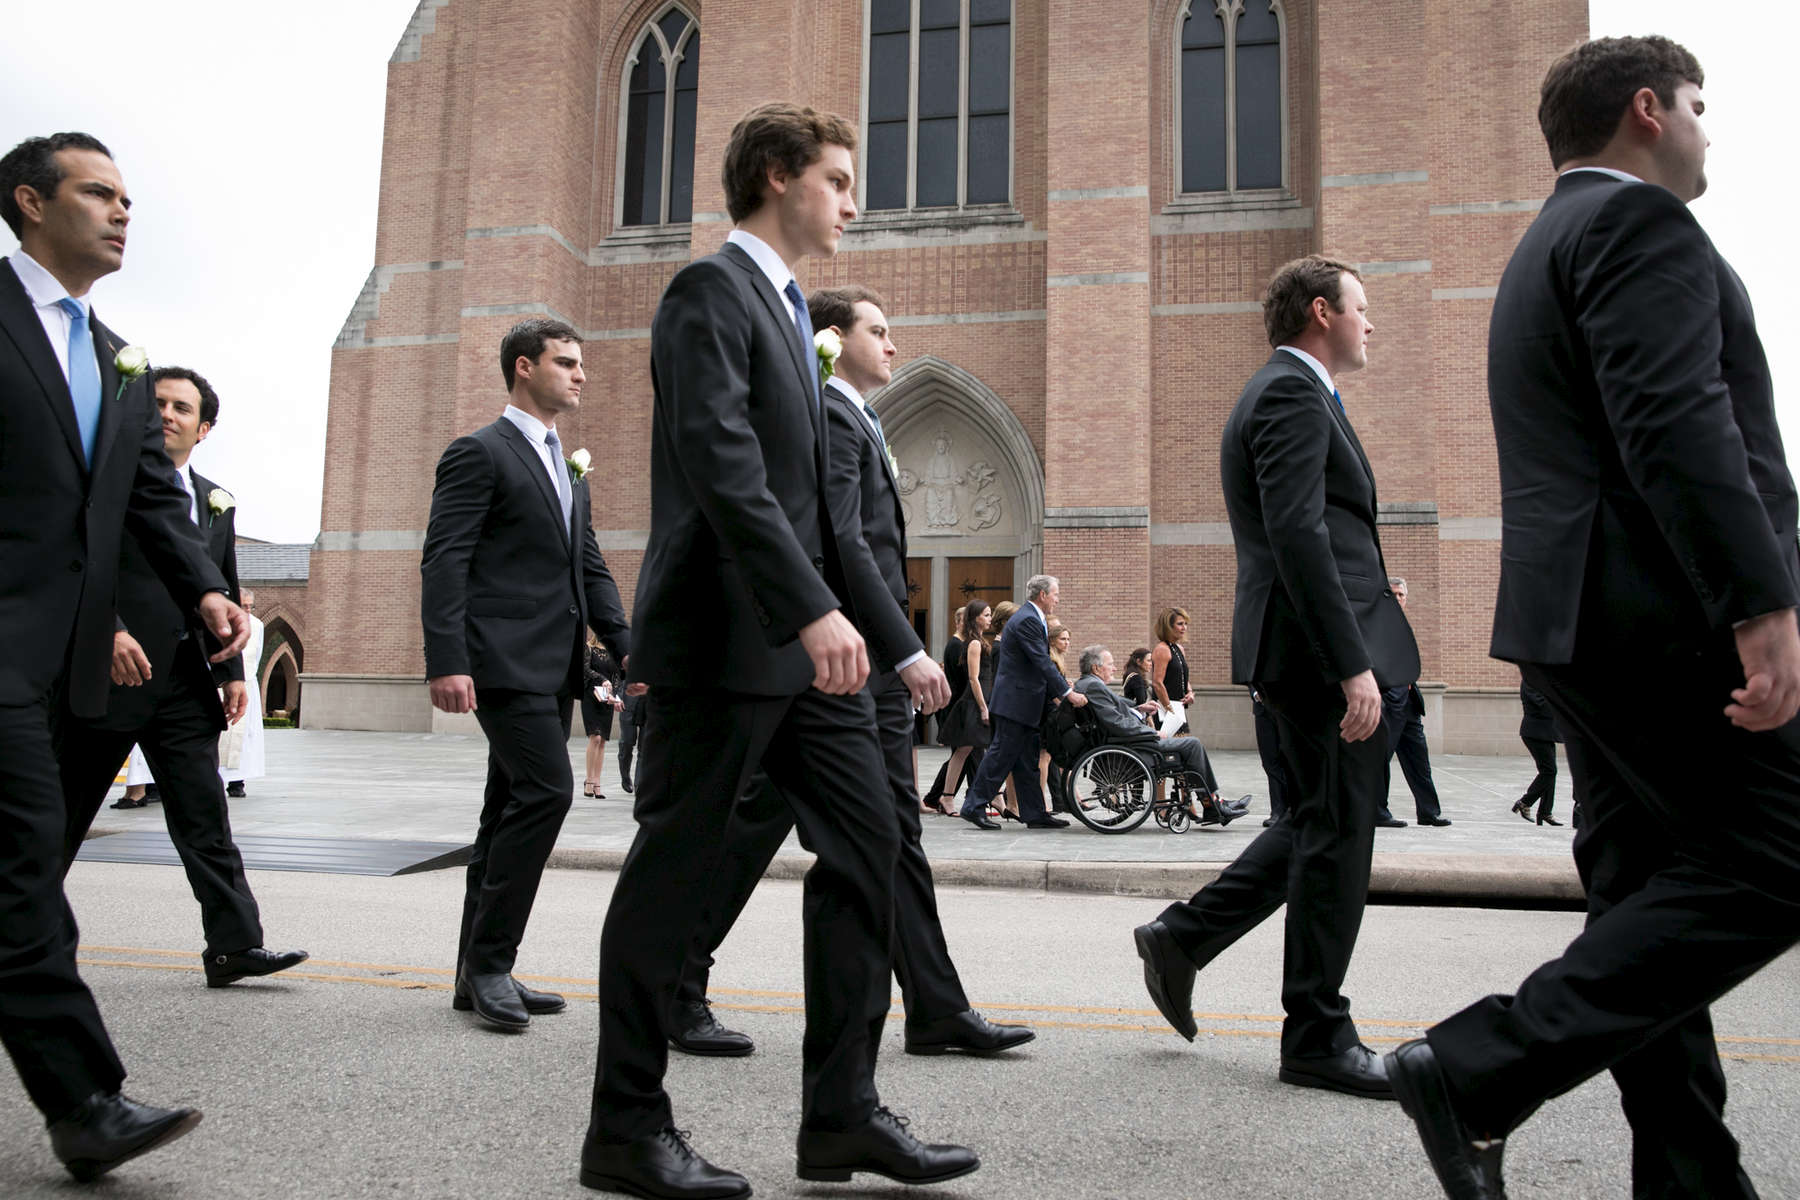 The funeral of former First Lady Barbara Bush on April 21, 2018. Photo by Paul Morse